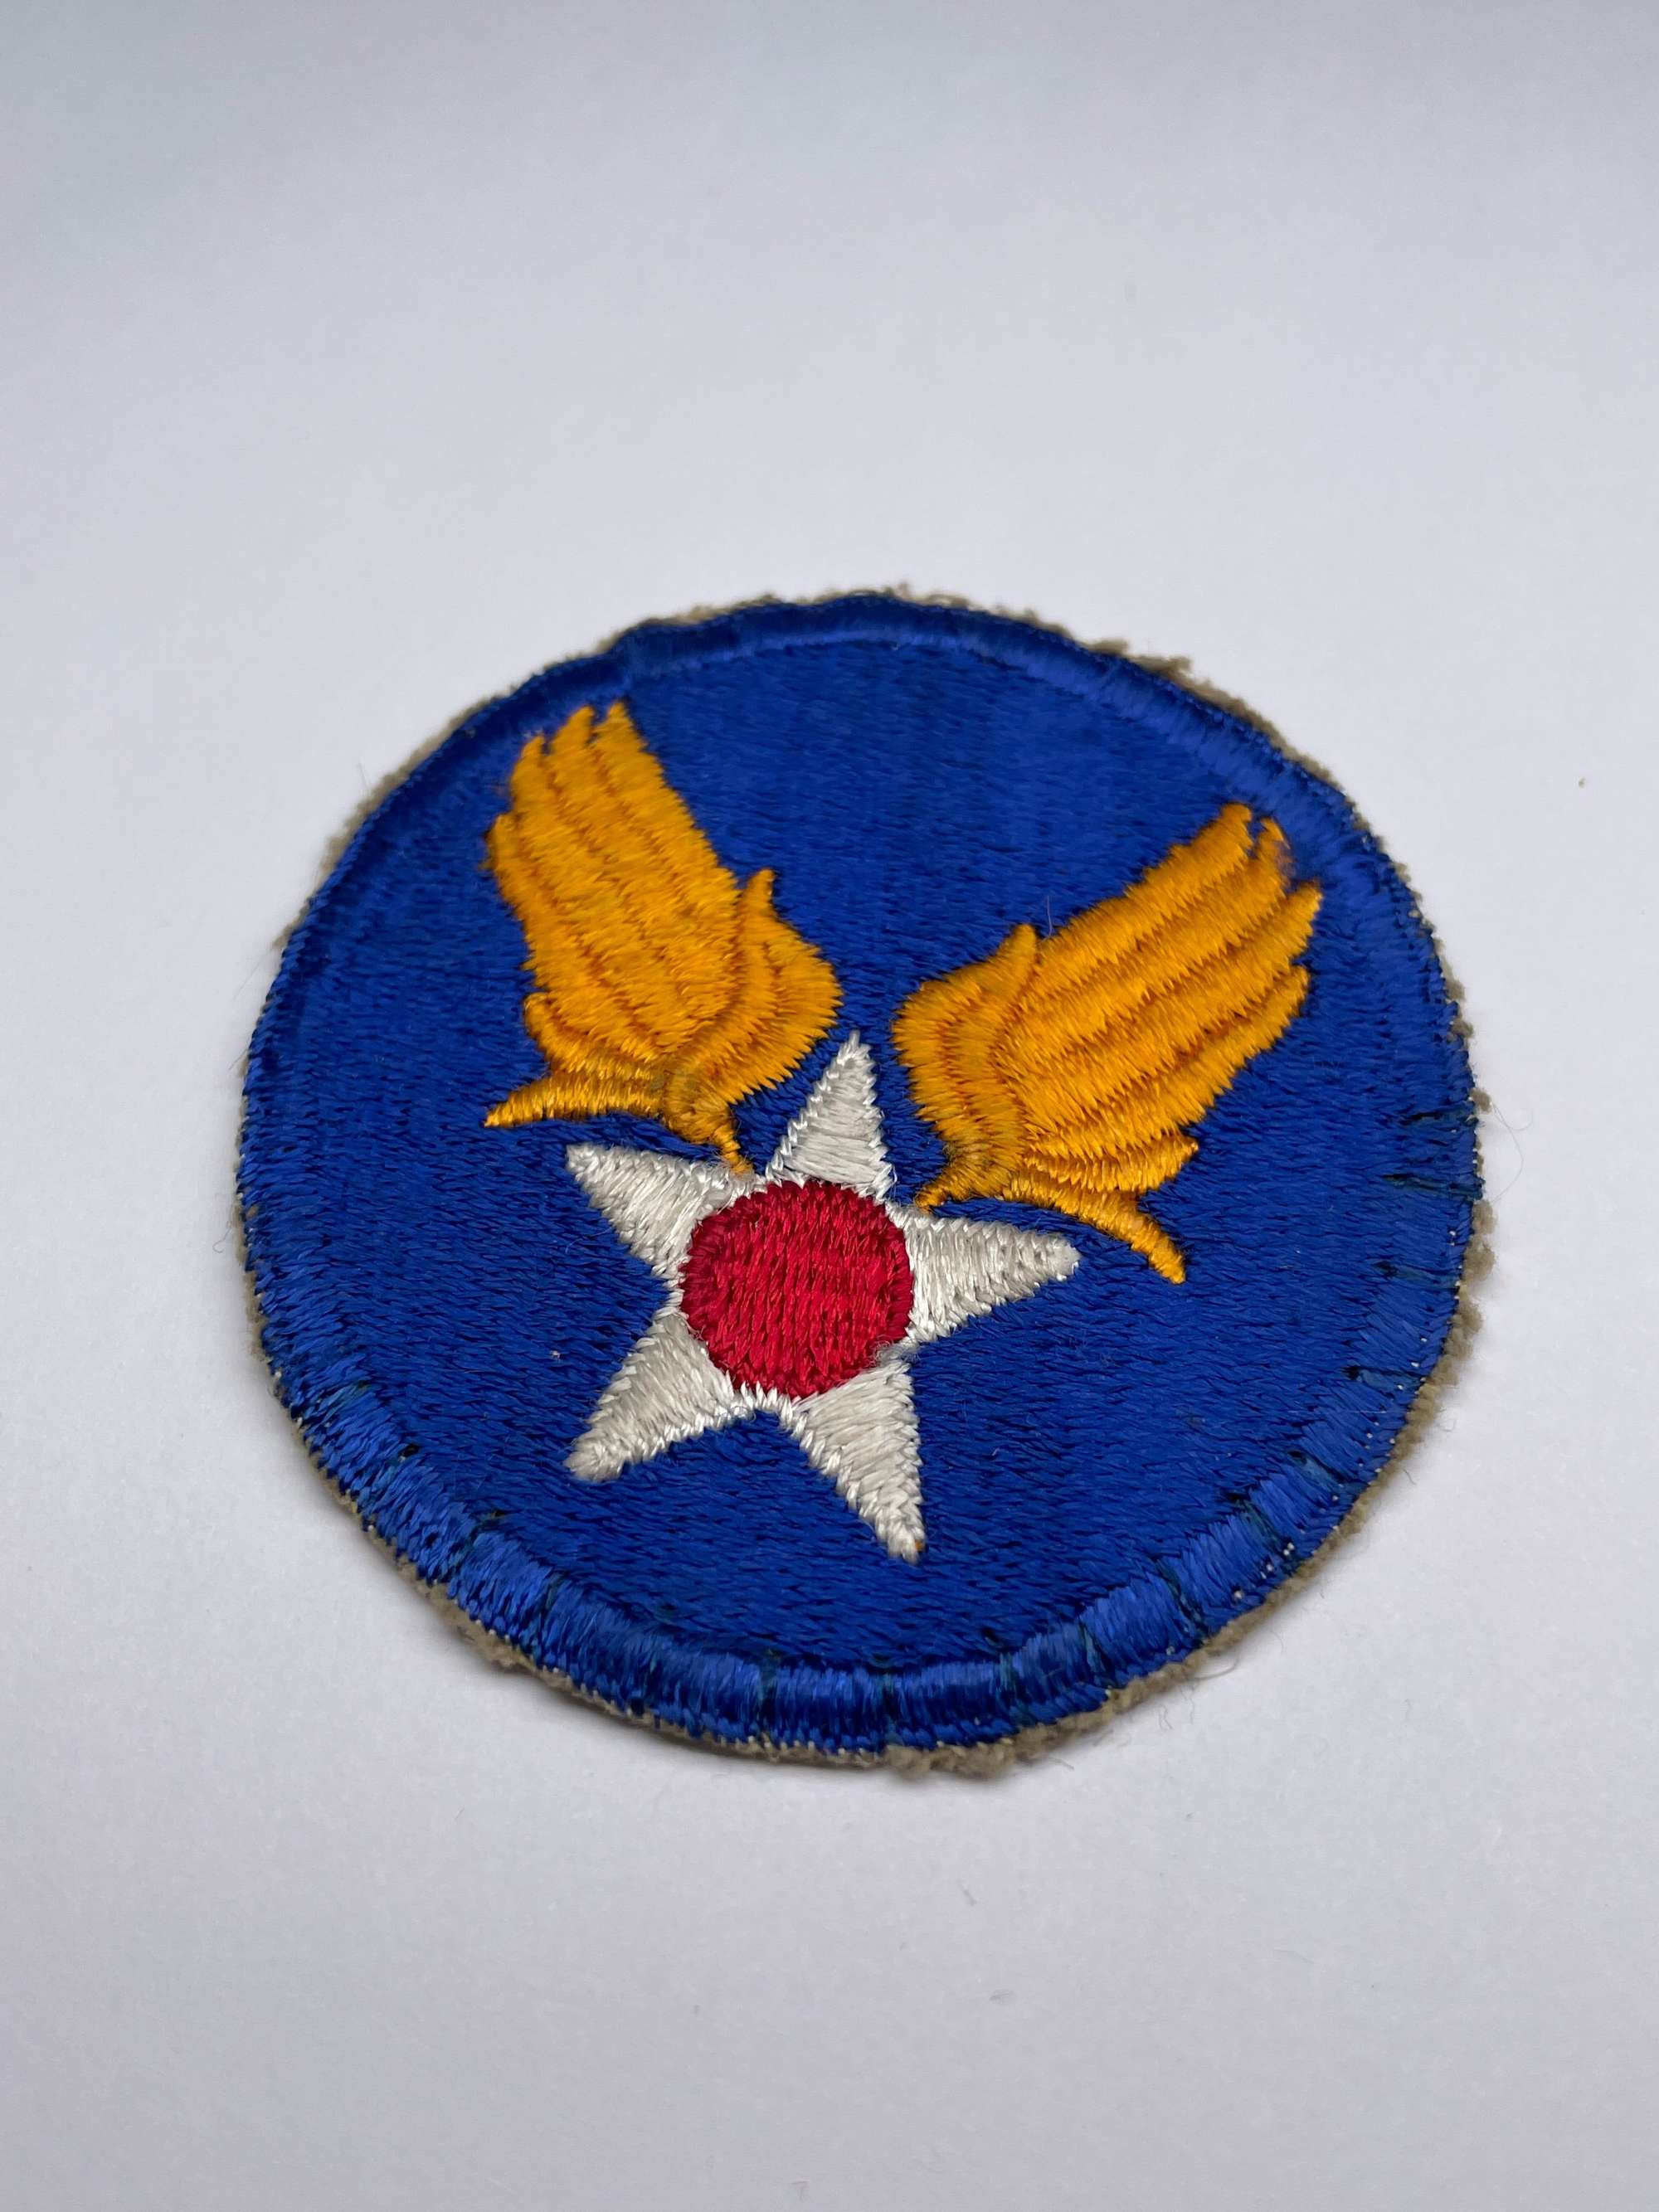 Original World War Two American Army Air Force Patch